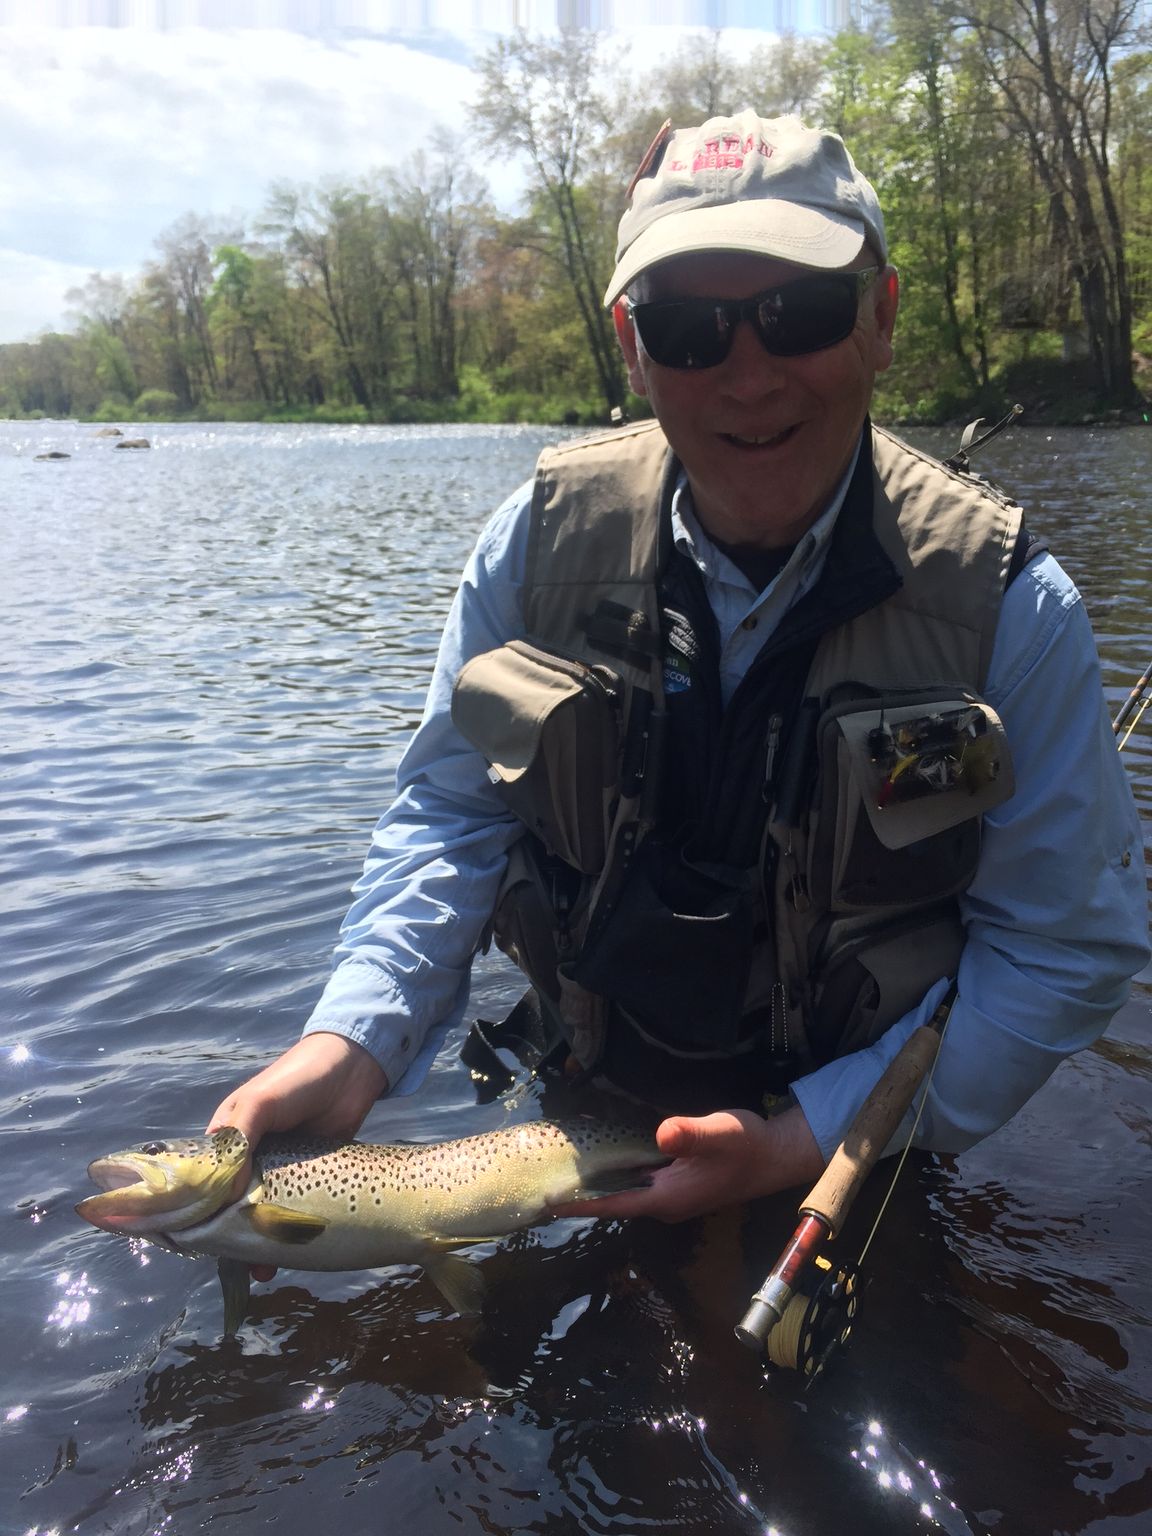 Steve J. holding a trout caught on a fly rod